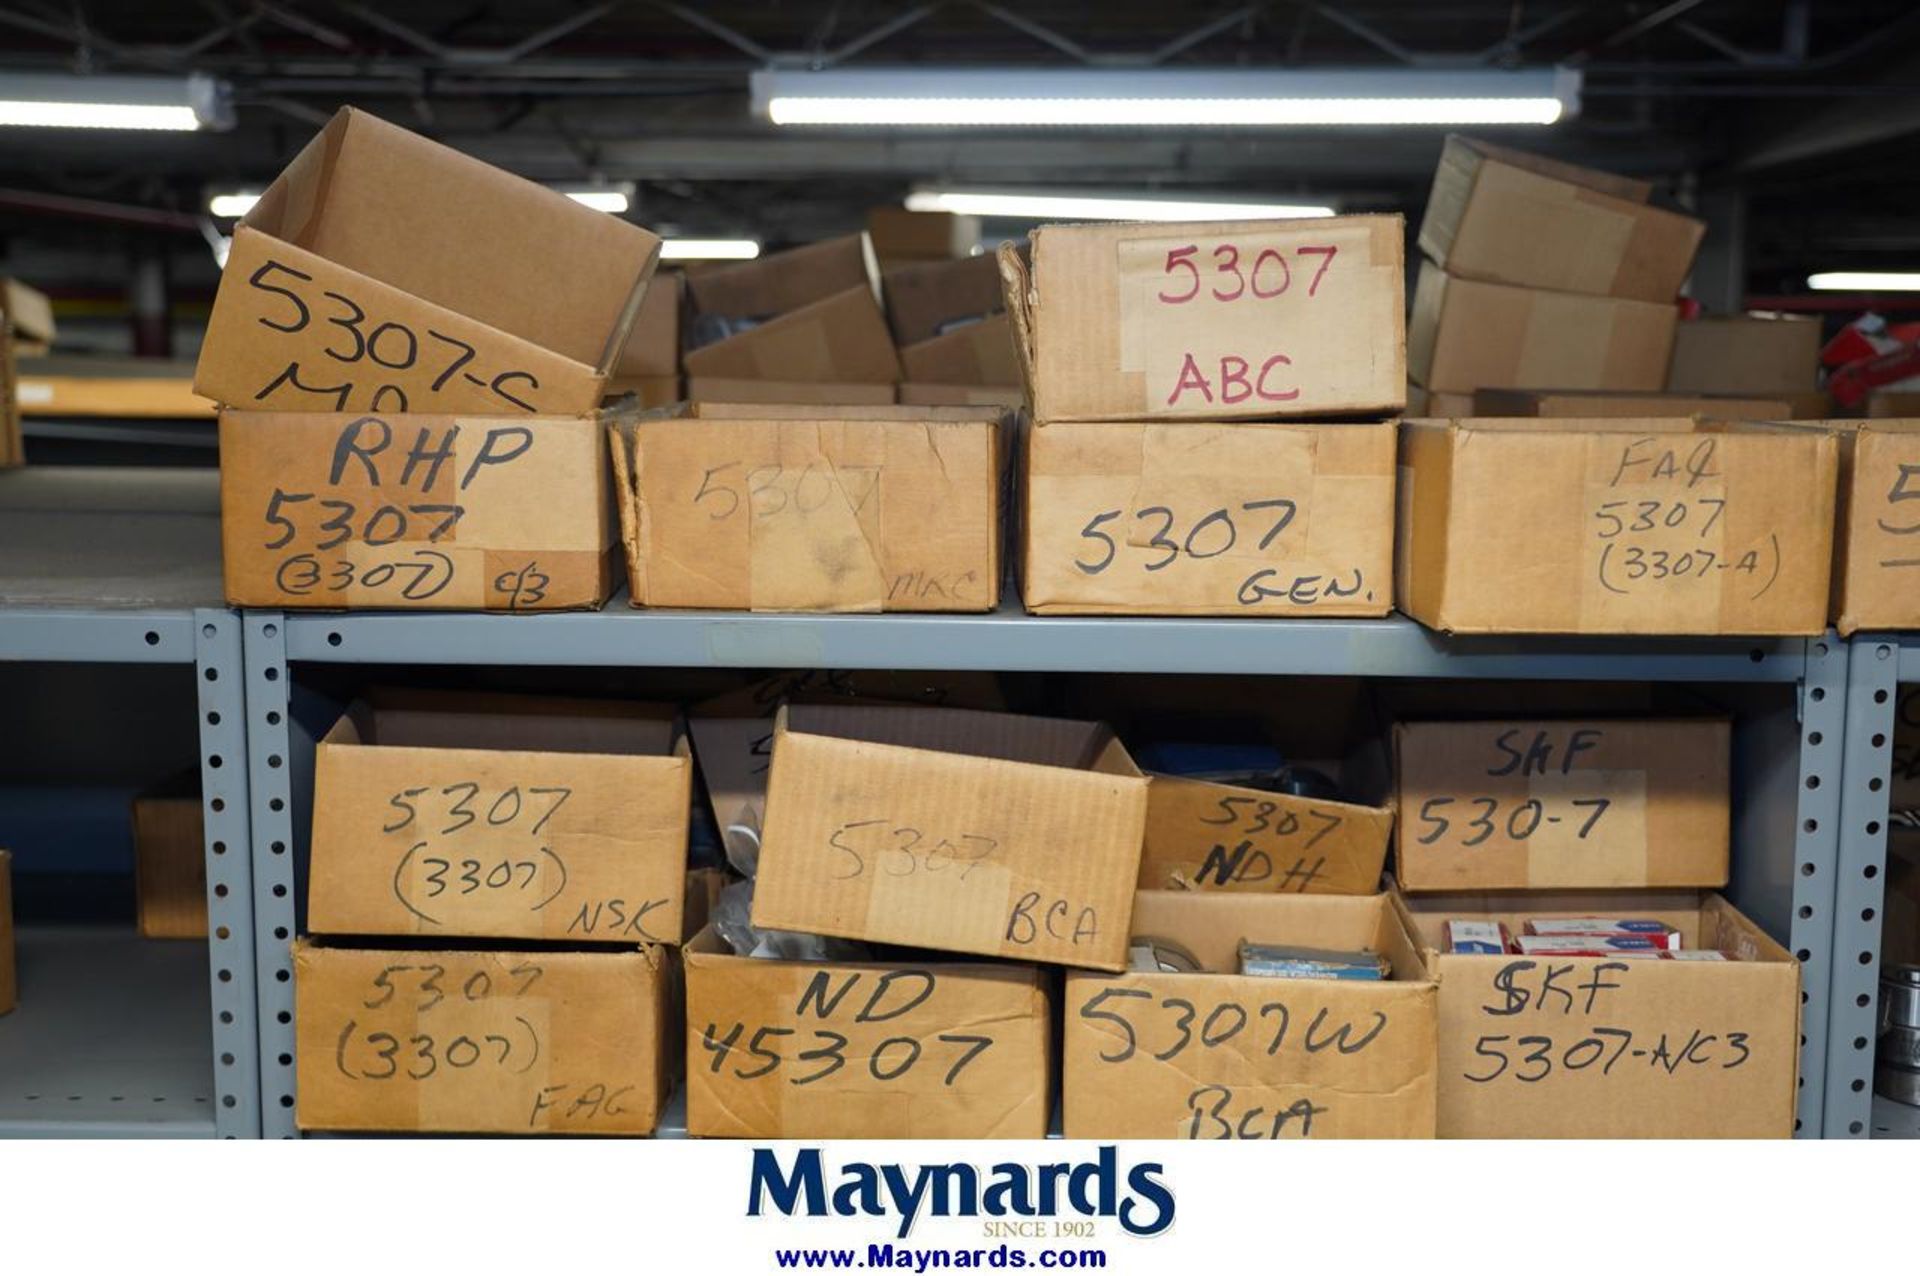 Lot of Assorted RHP,GEN,FAG,ABC,MRC, NSK,BCA, FAF,SKF,Steyr, Open Double Row Bearings - Image 2 of 7